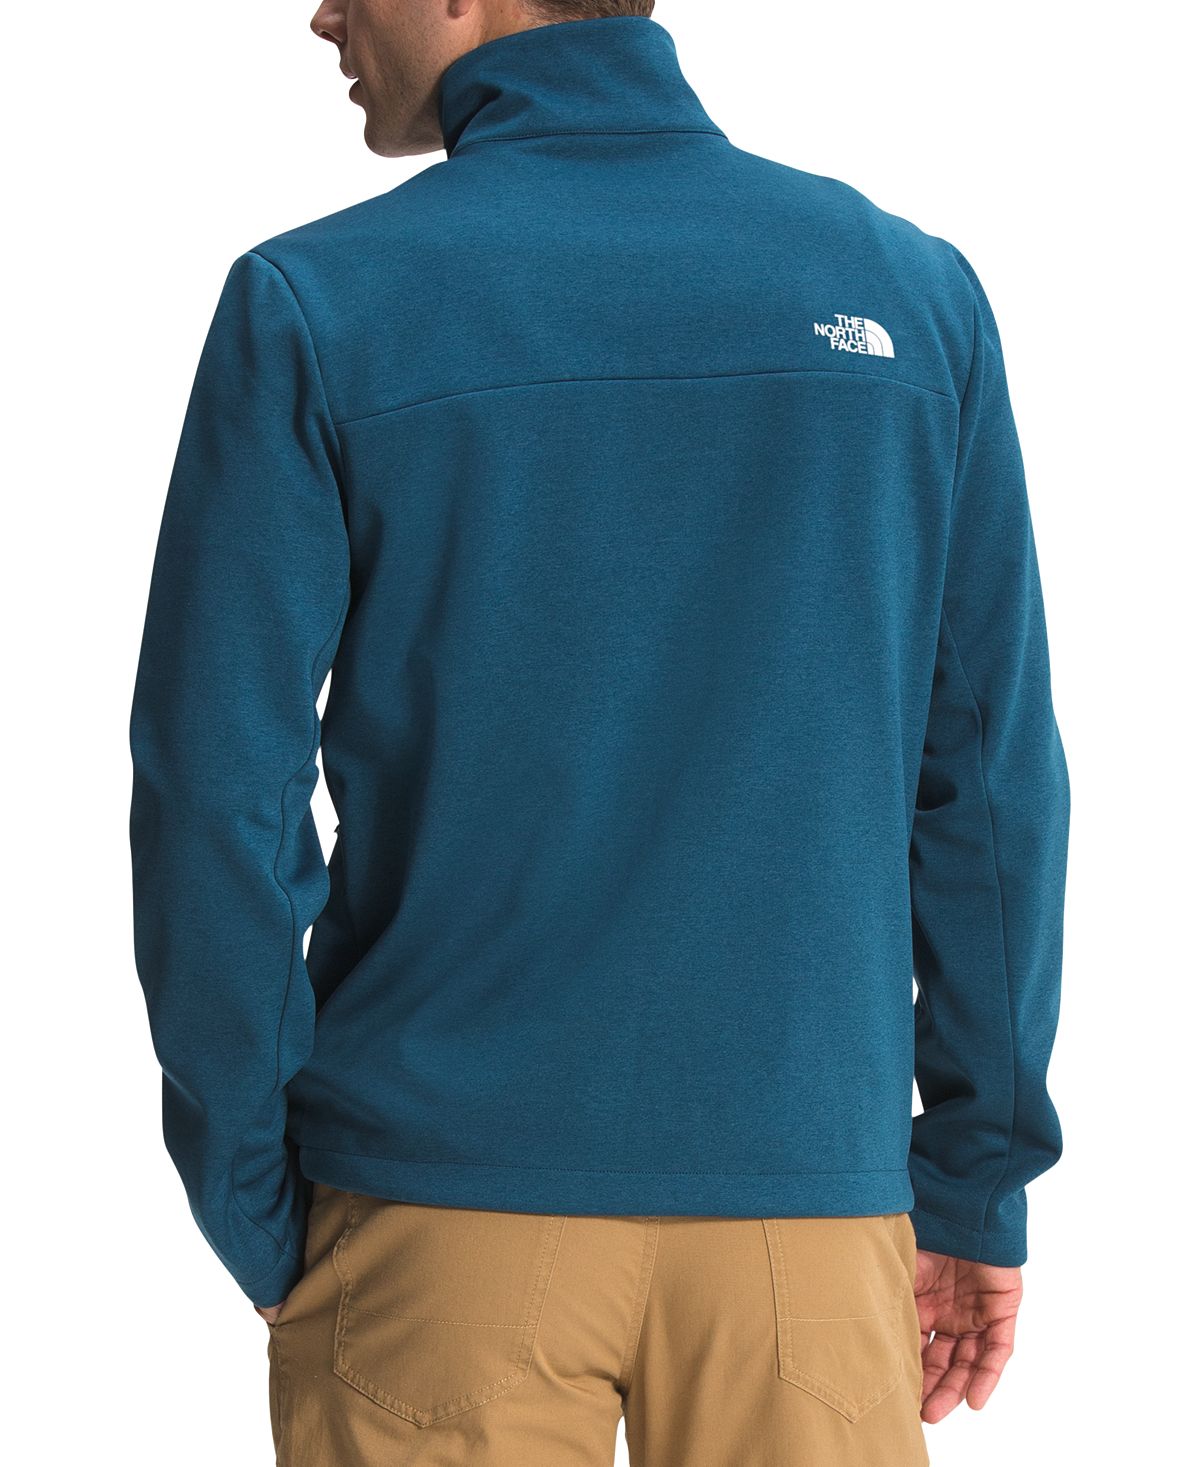 The North Face Apex Canyonwall Jacket Montery Blue Heather